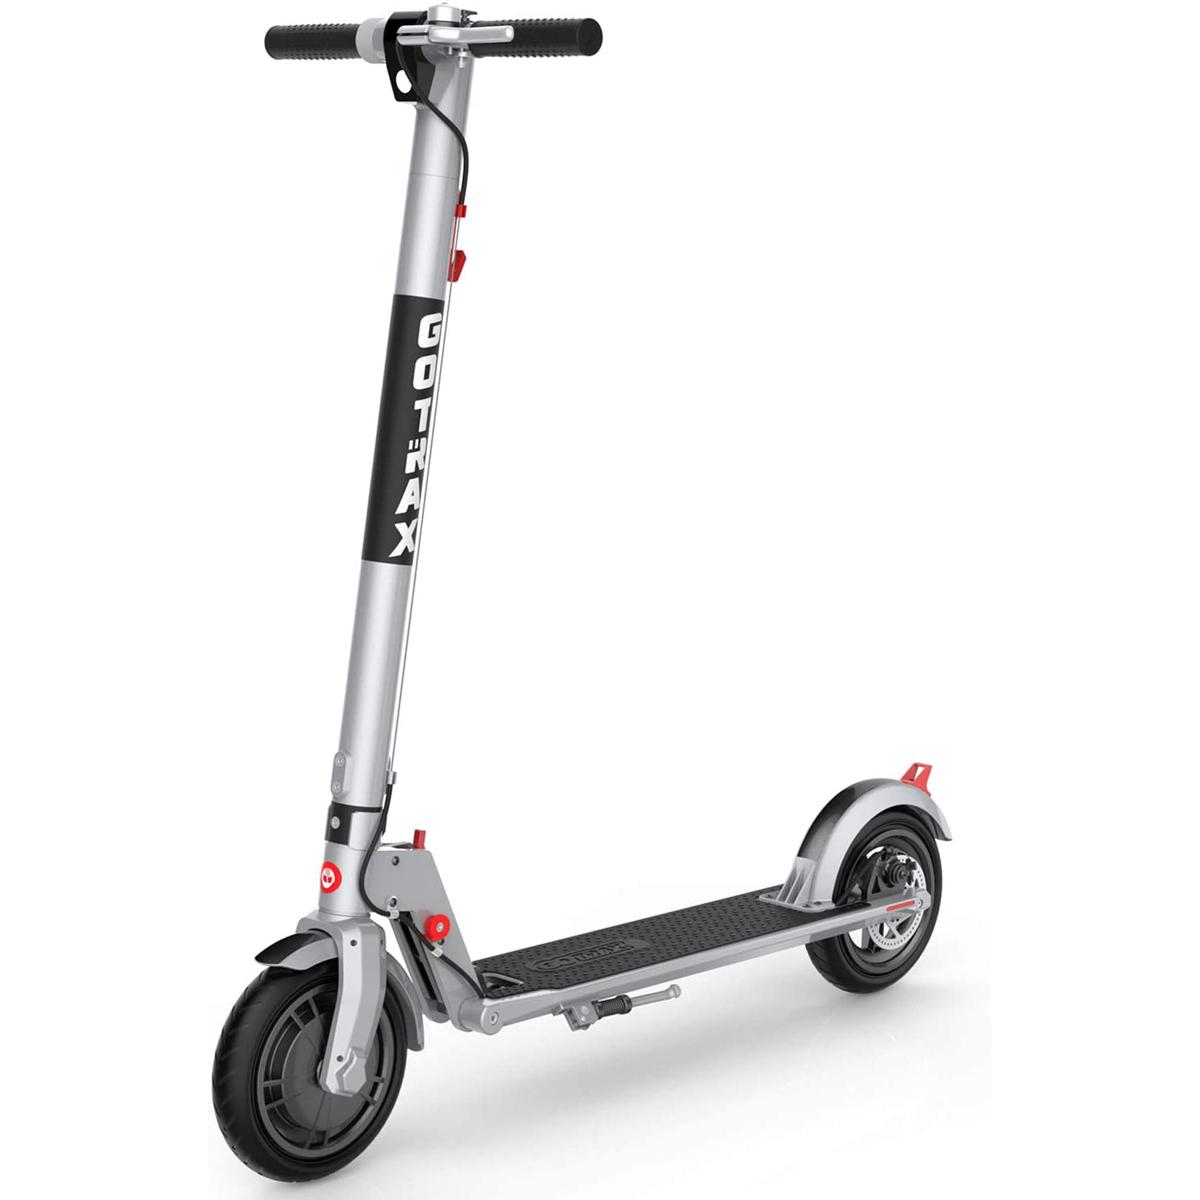 Gotrax Xr Ultra Commuting Electric Scooter for $299.99 Shipped